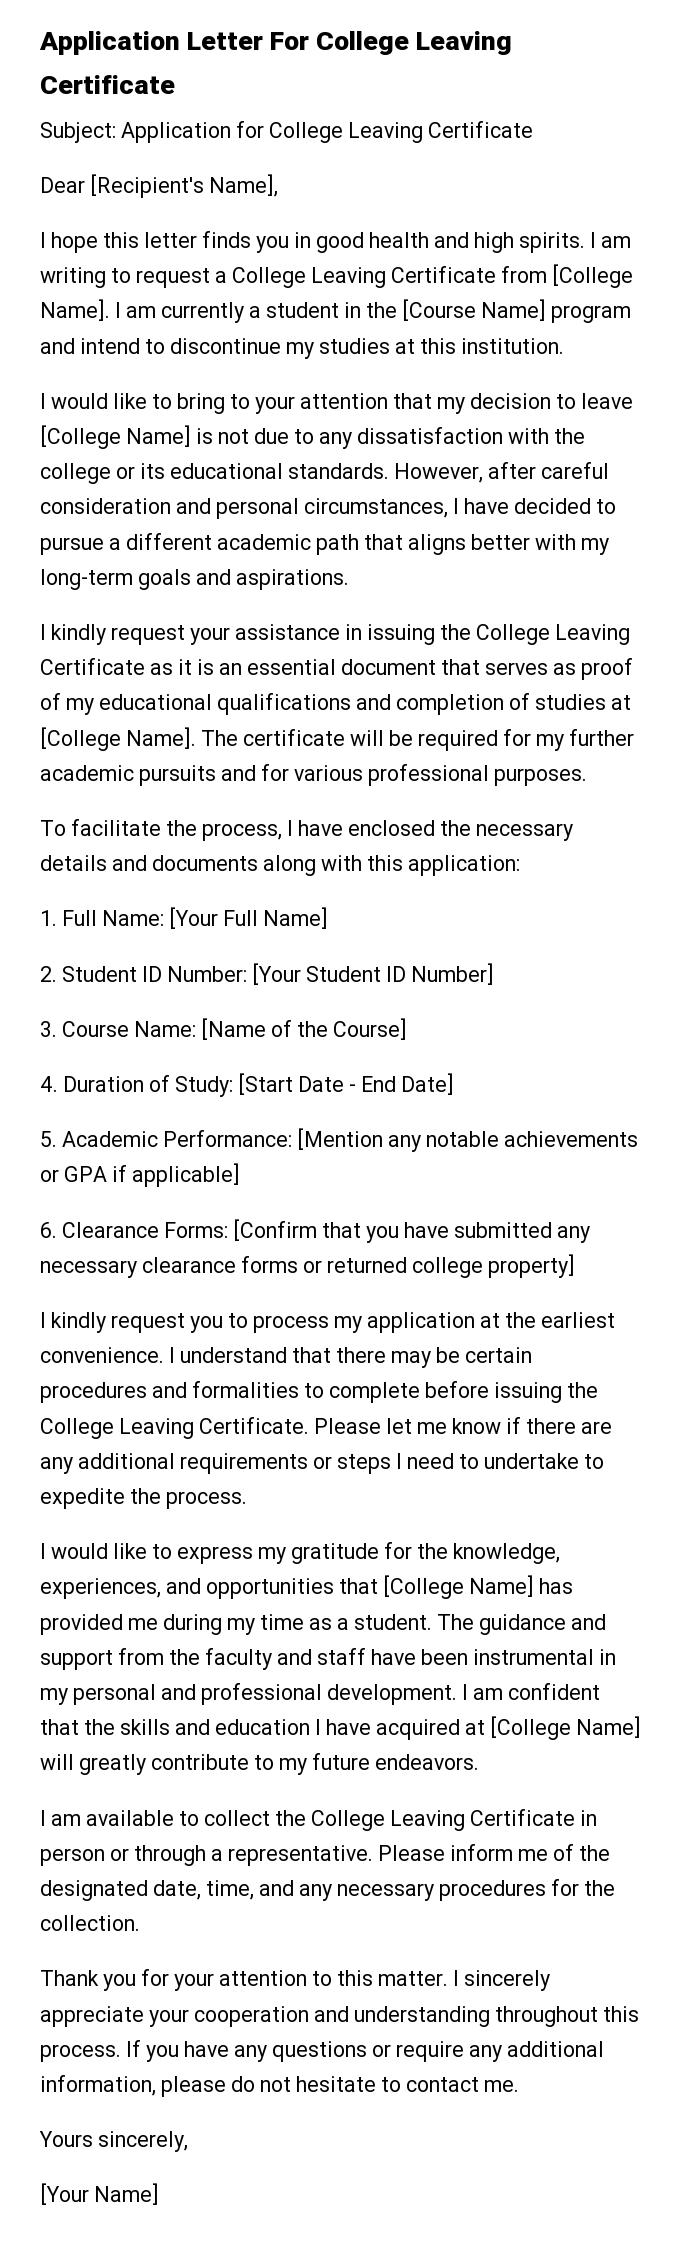 Application Letter For College Leaving Certificate